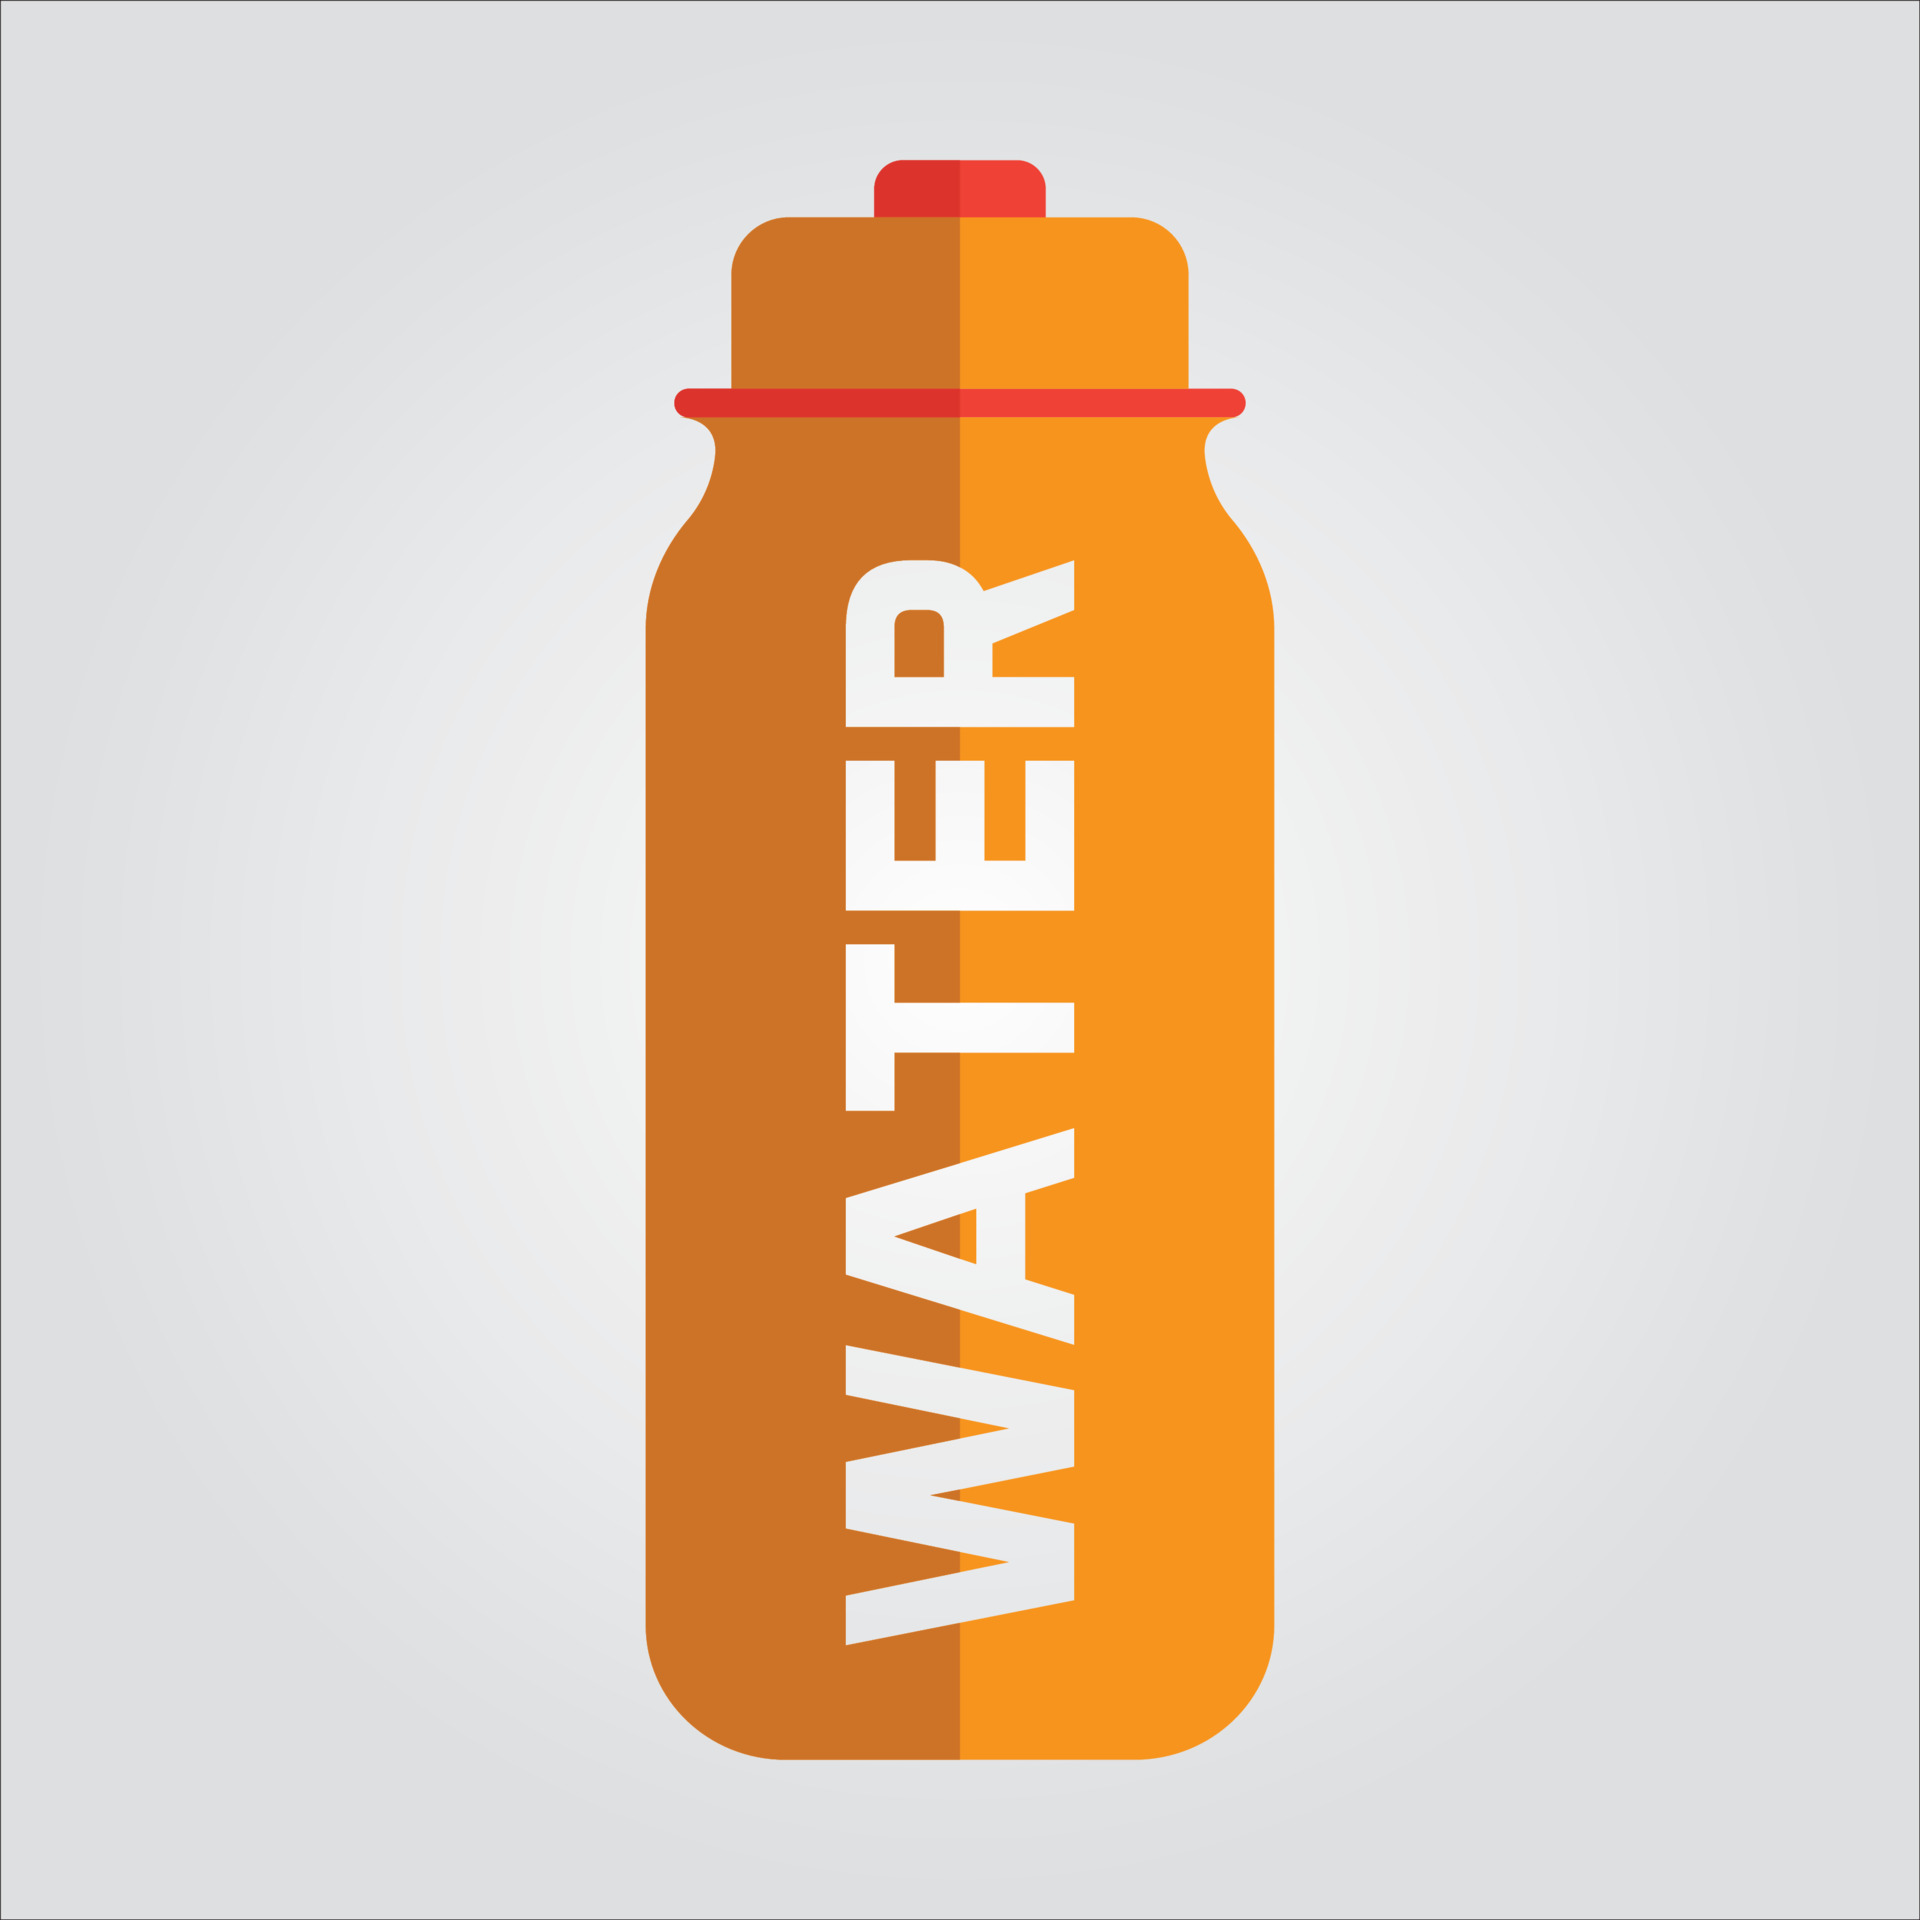 https://static.vecteezy.com/system/resources/previews/004/814/396/original/isolated-water-bottle-images-transparent-scalable-graphic-icon-vector.jpg